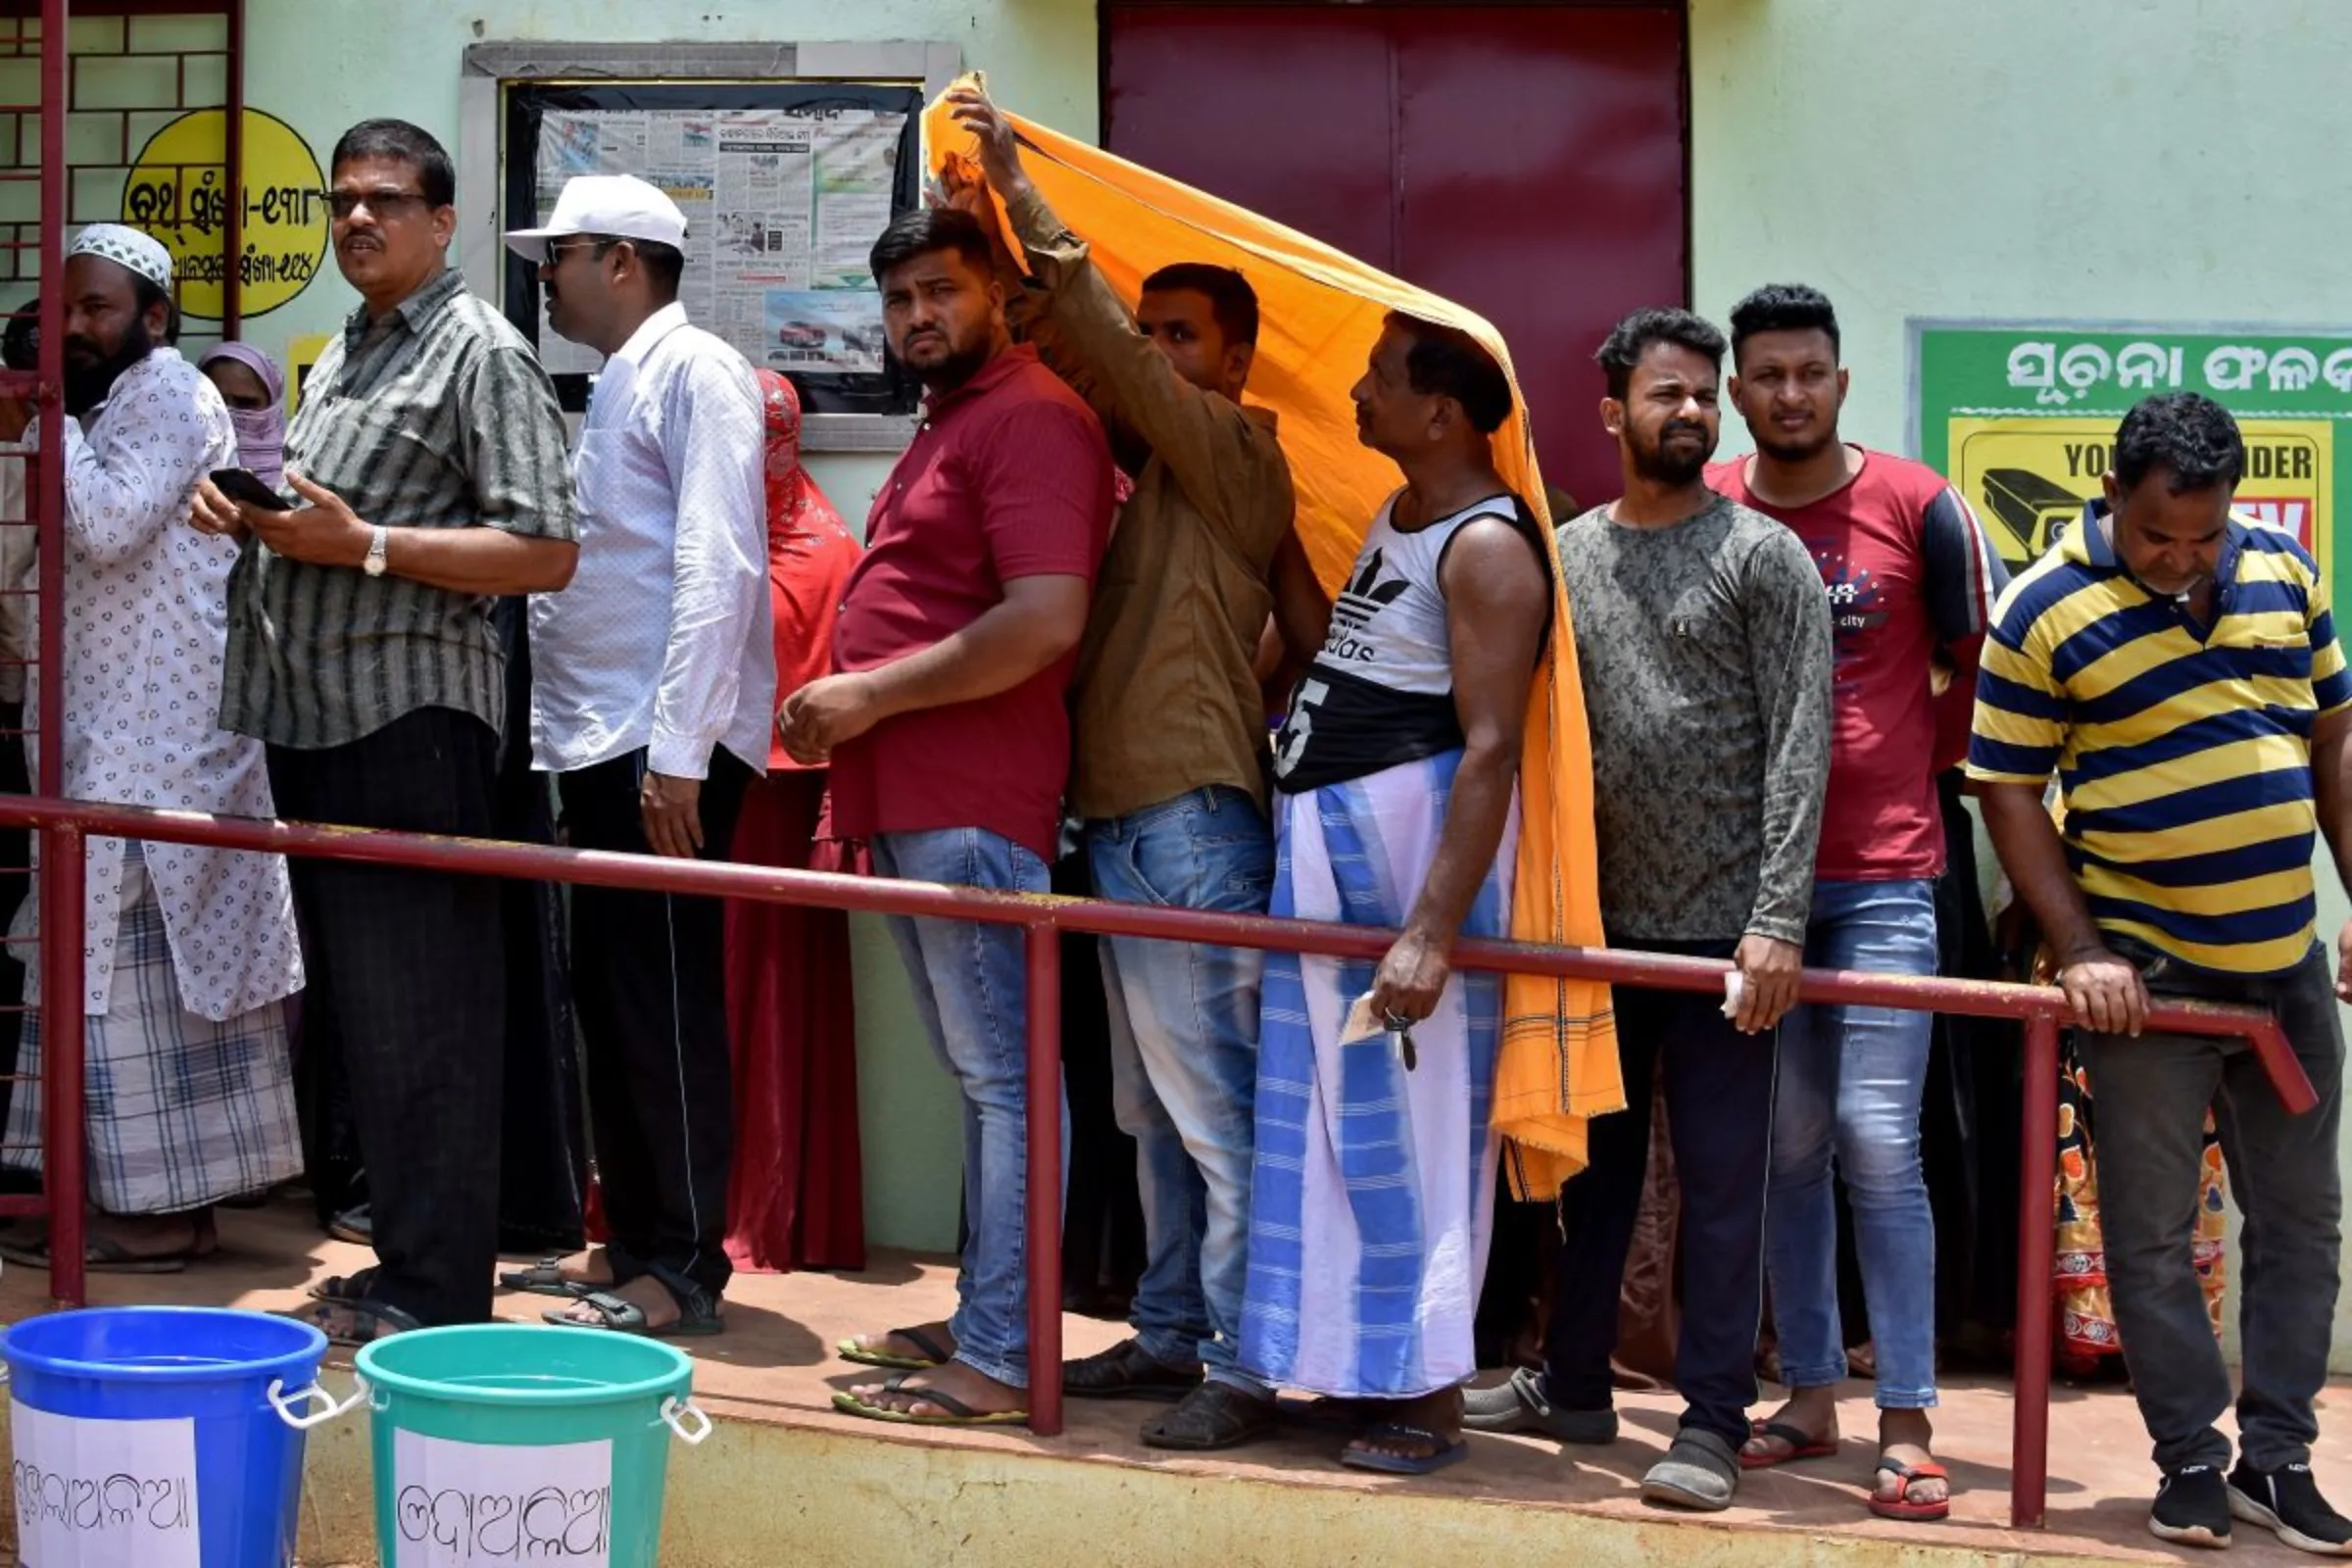 Men use a stole to cover from heat as they wait in a line outside a polling station to cast their votes during the sixth phase of India's general election, on a hot summer day in Bhubaneswar, India, May 25, 2024. REUTERS/Stringer